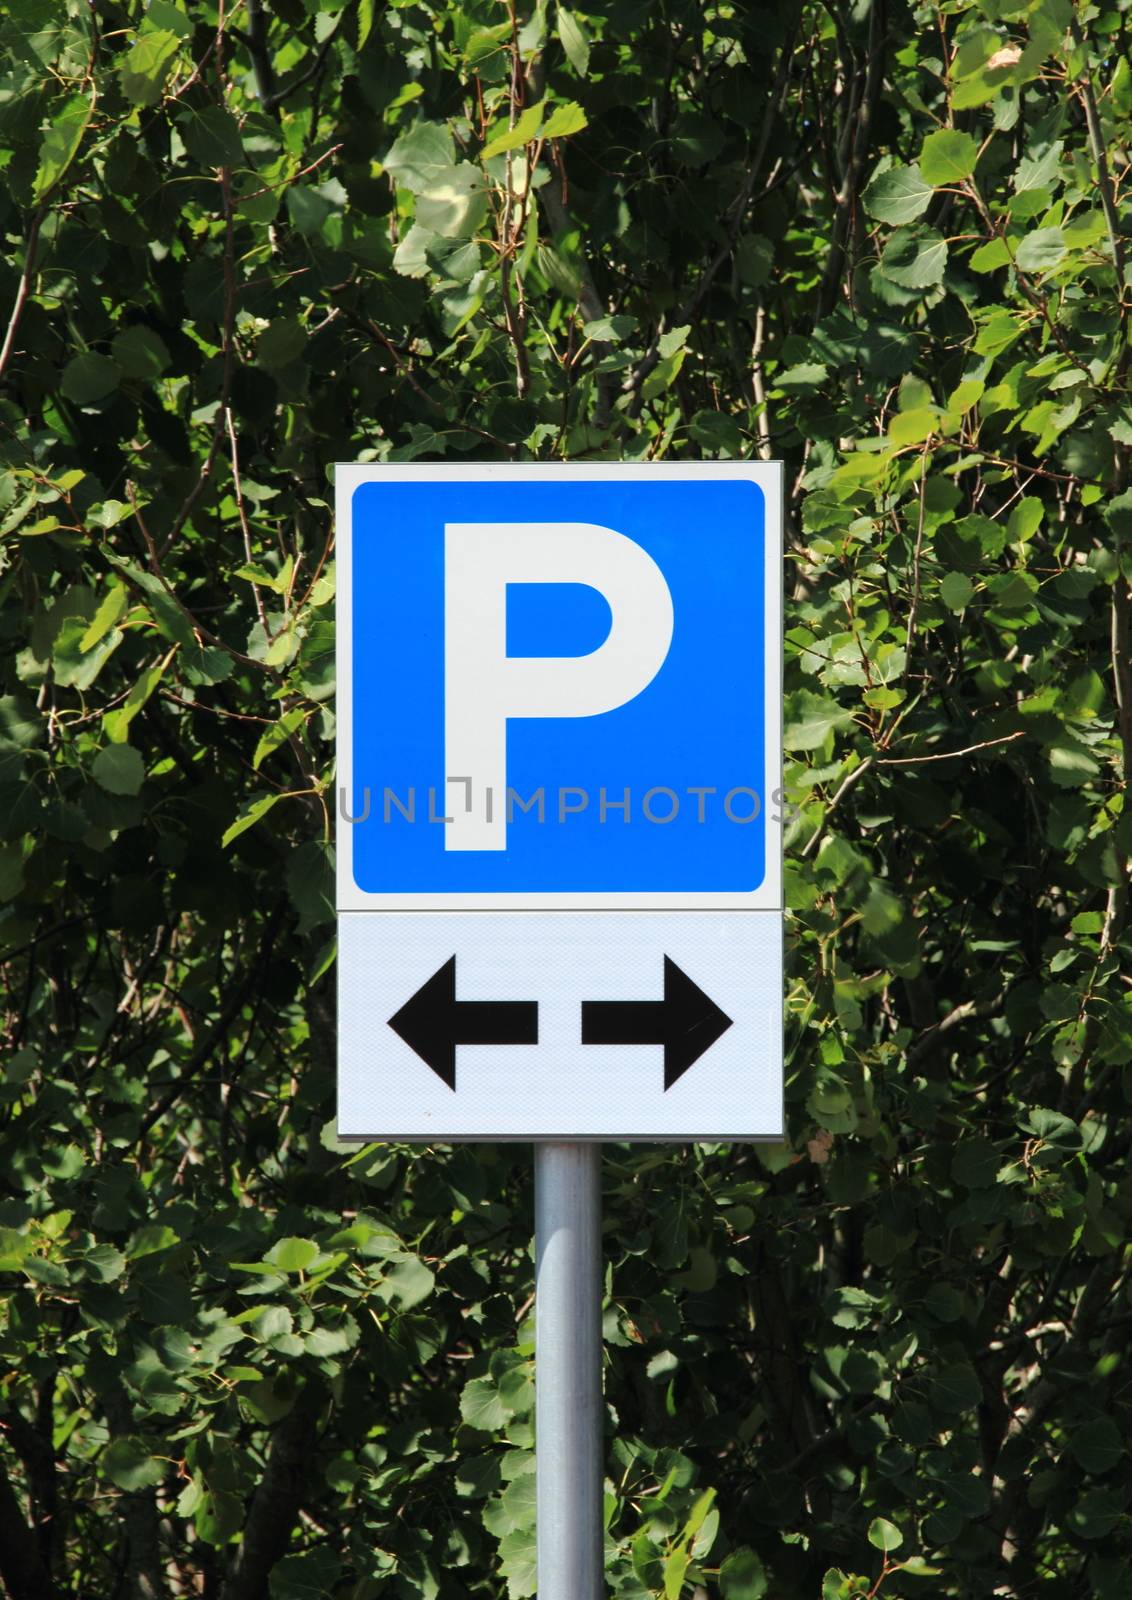 Parking sign with two black direction arrows